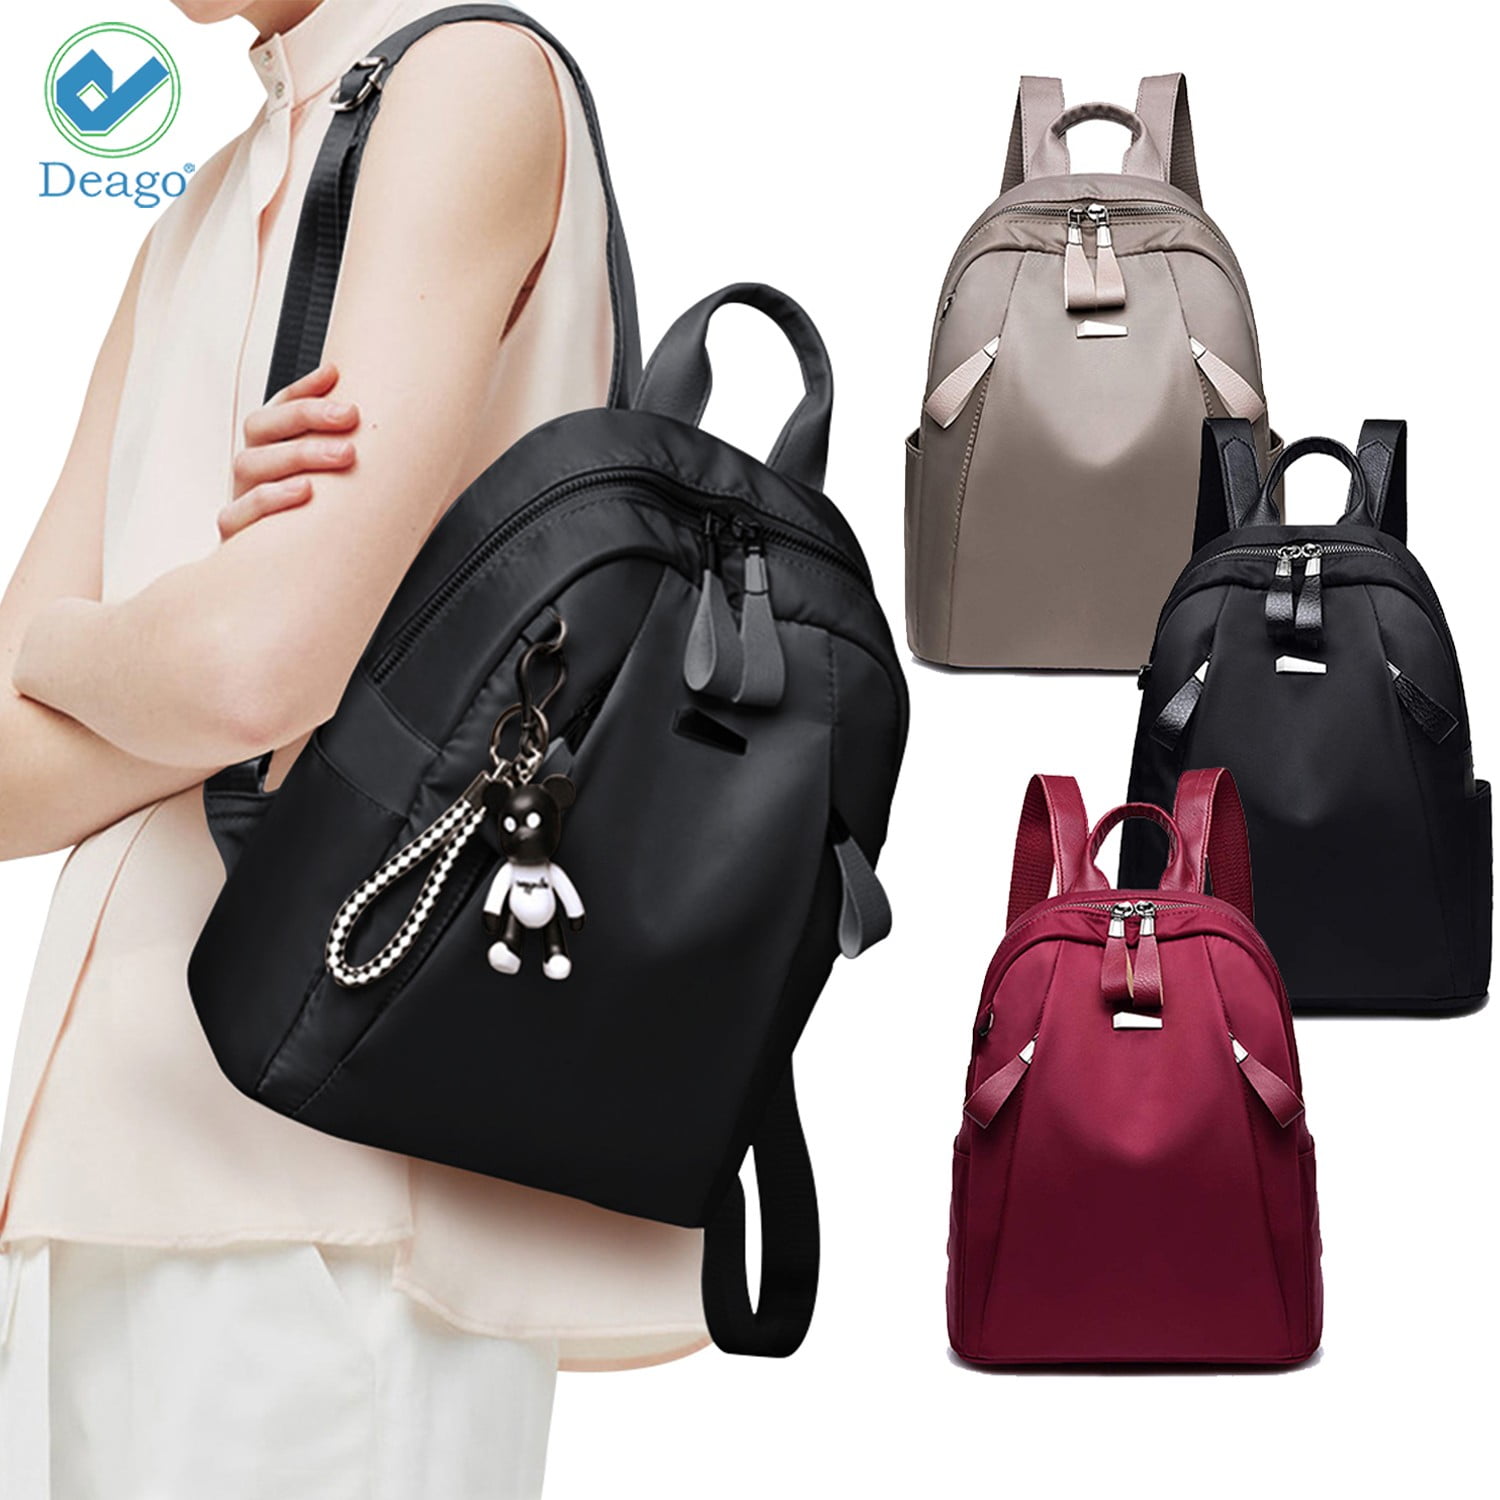 PU Leather Shoulder Bag,Hot Air Balloons Backpack,Portable Travel School Rucksack,Satchel with Top Handle 